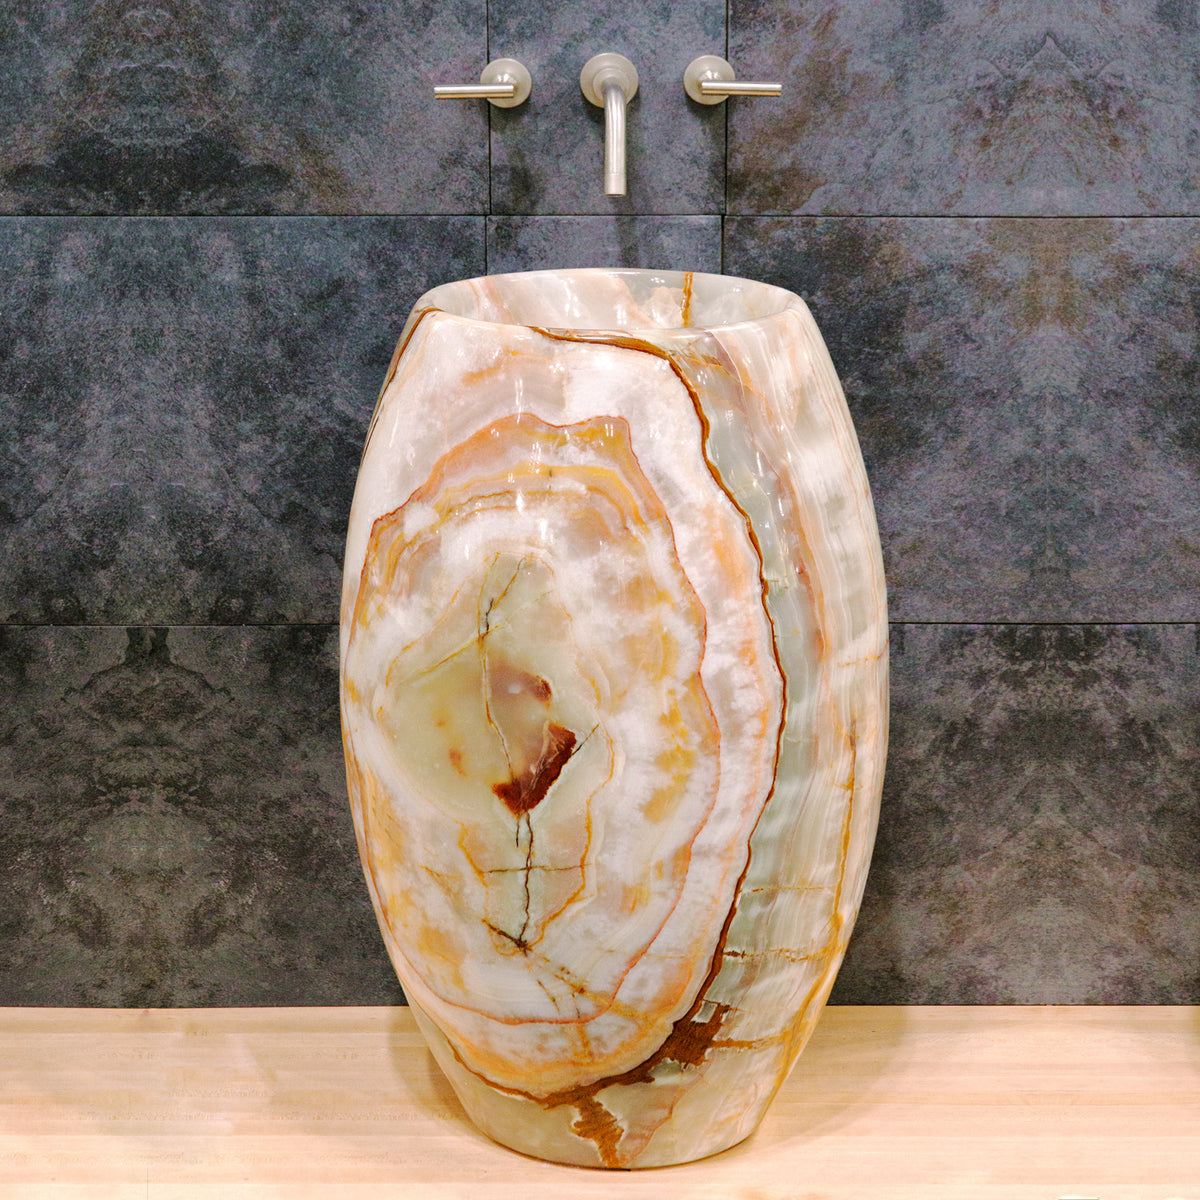 Stone Forest Barrel Pedestal Sink carved from a single block of multi-color onyx image 3 of 3